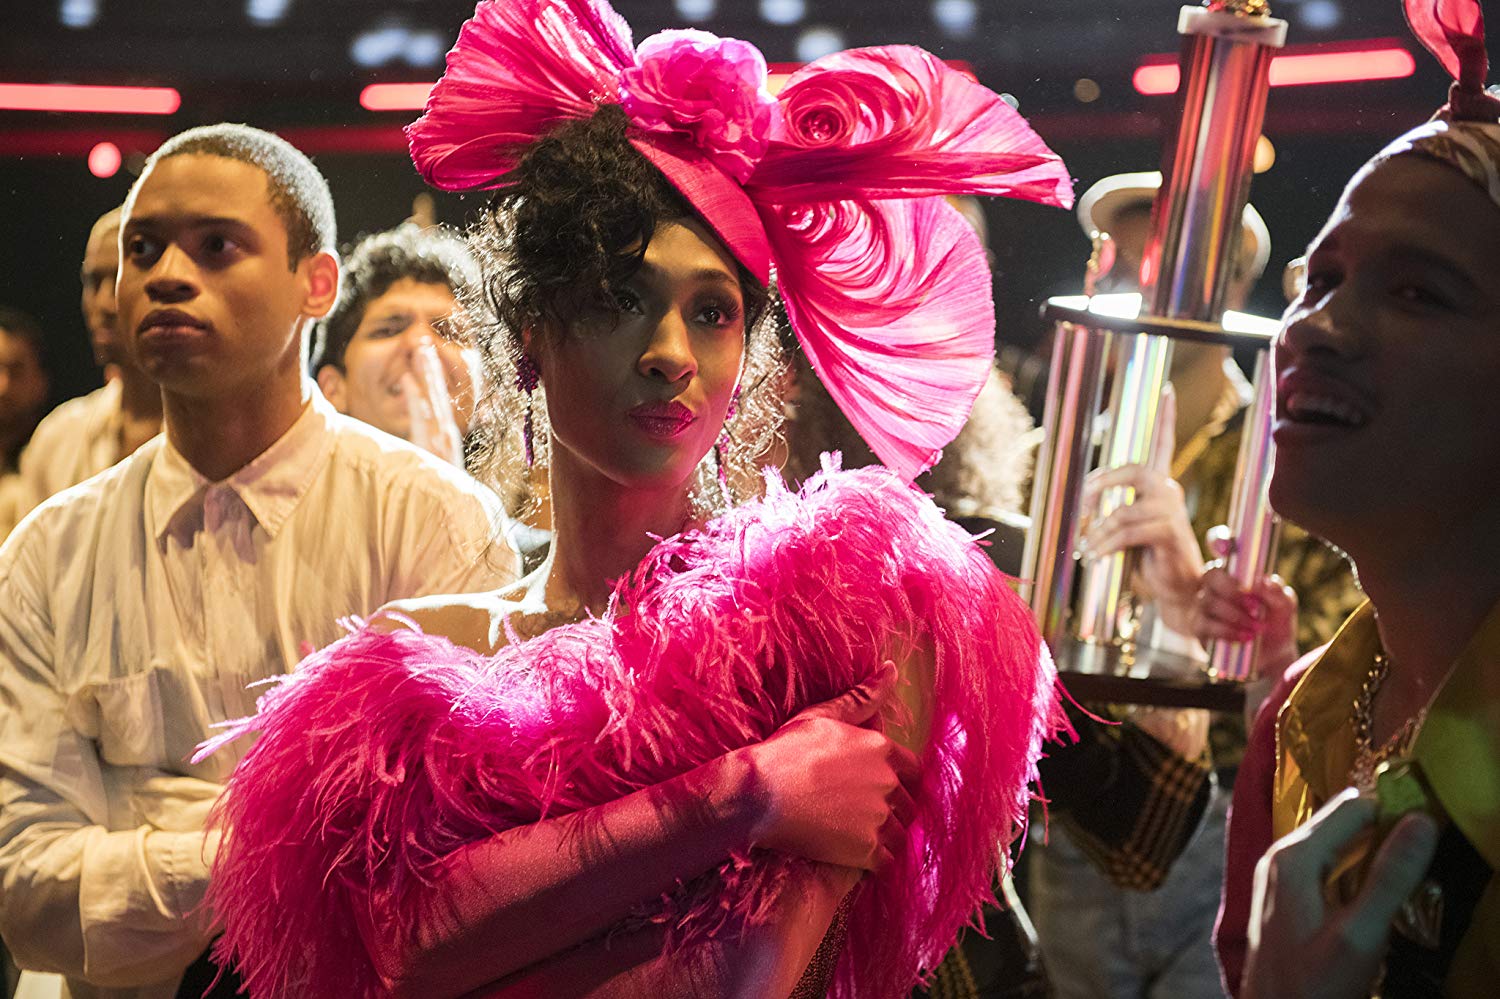 Amid a crowd, Mj Rodriguez, in a feathery pink outfit and wearing a pink hat, holds a trophy after winning a ball category.